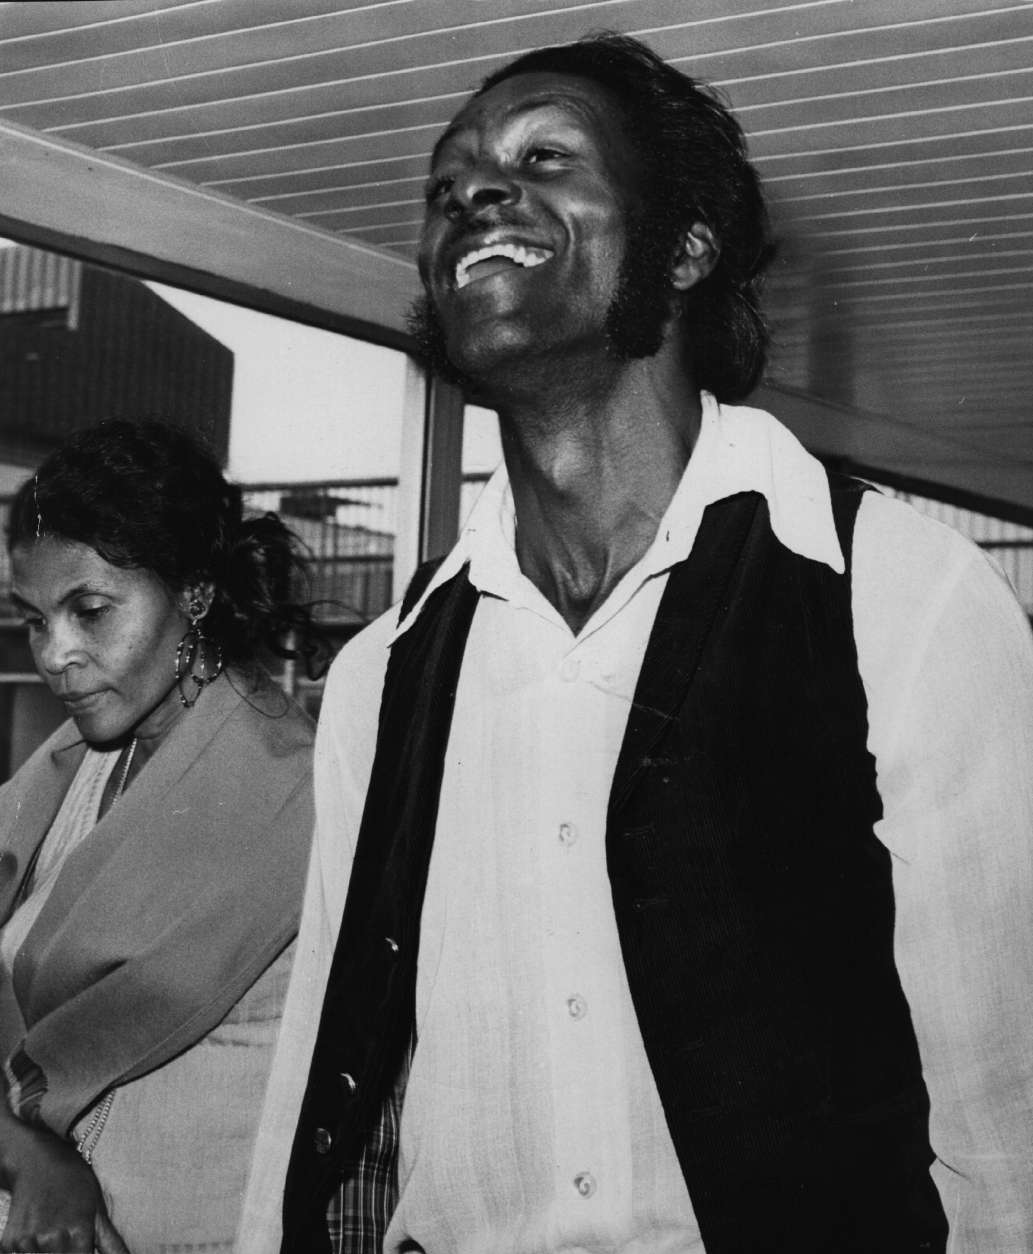 circa 1972:  Rock 'n' roll great Chuck Berry in good spirits at Heathrow Airport with his wife.  (Photo by Evening Standard/Getty Images)